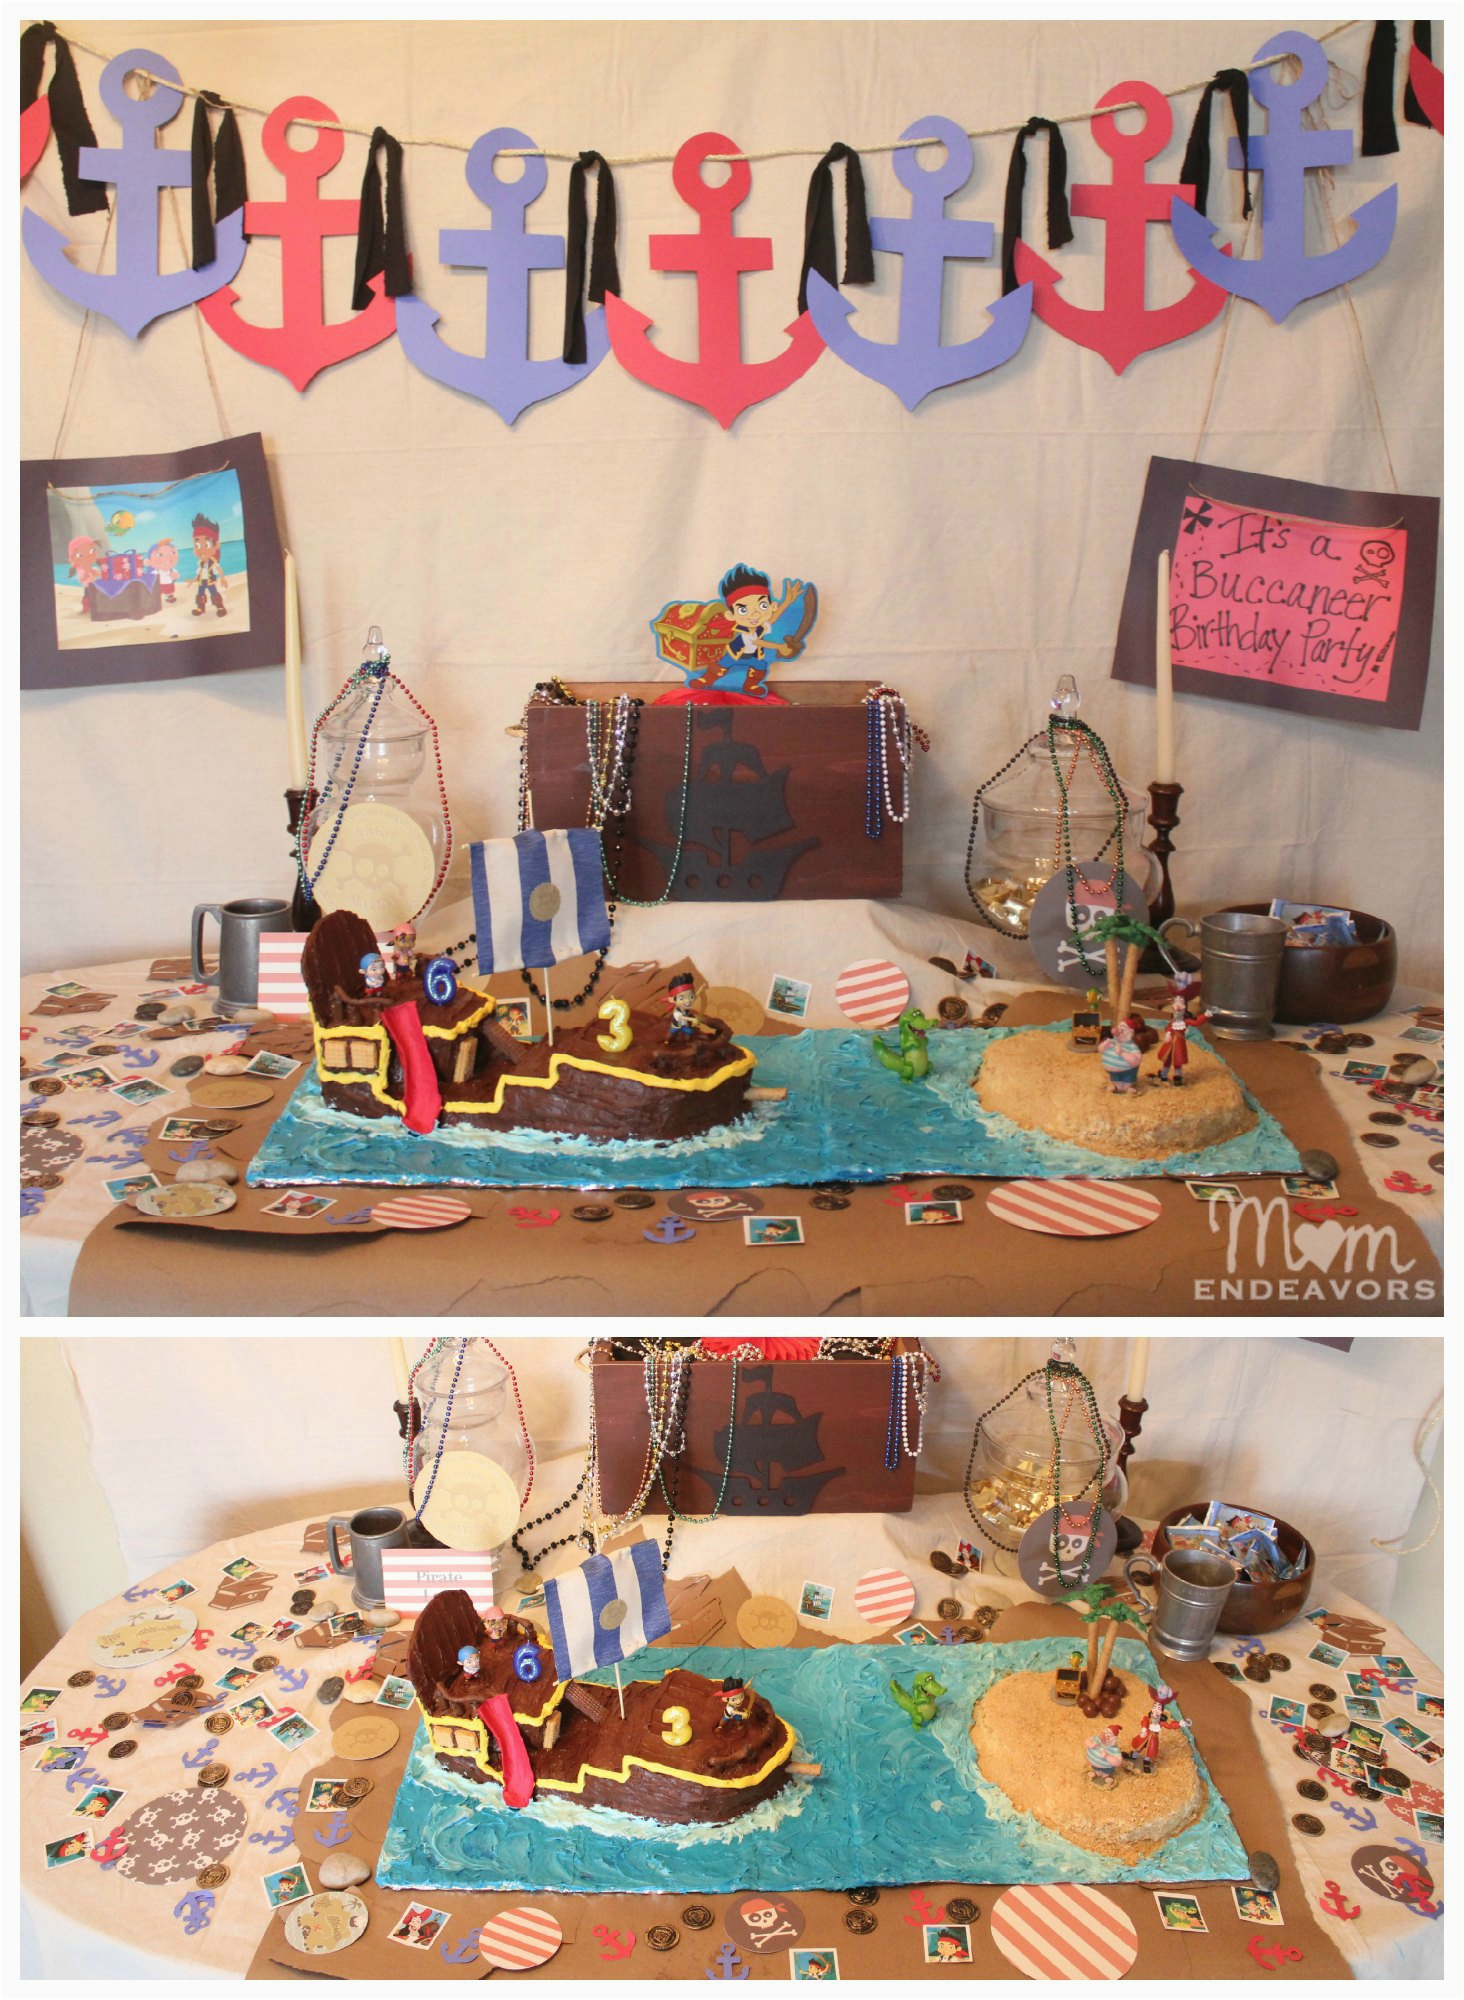 jake and the never land pirates birthday party